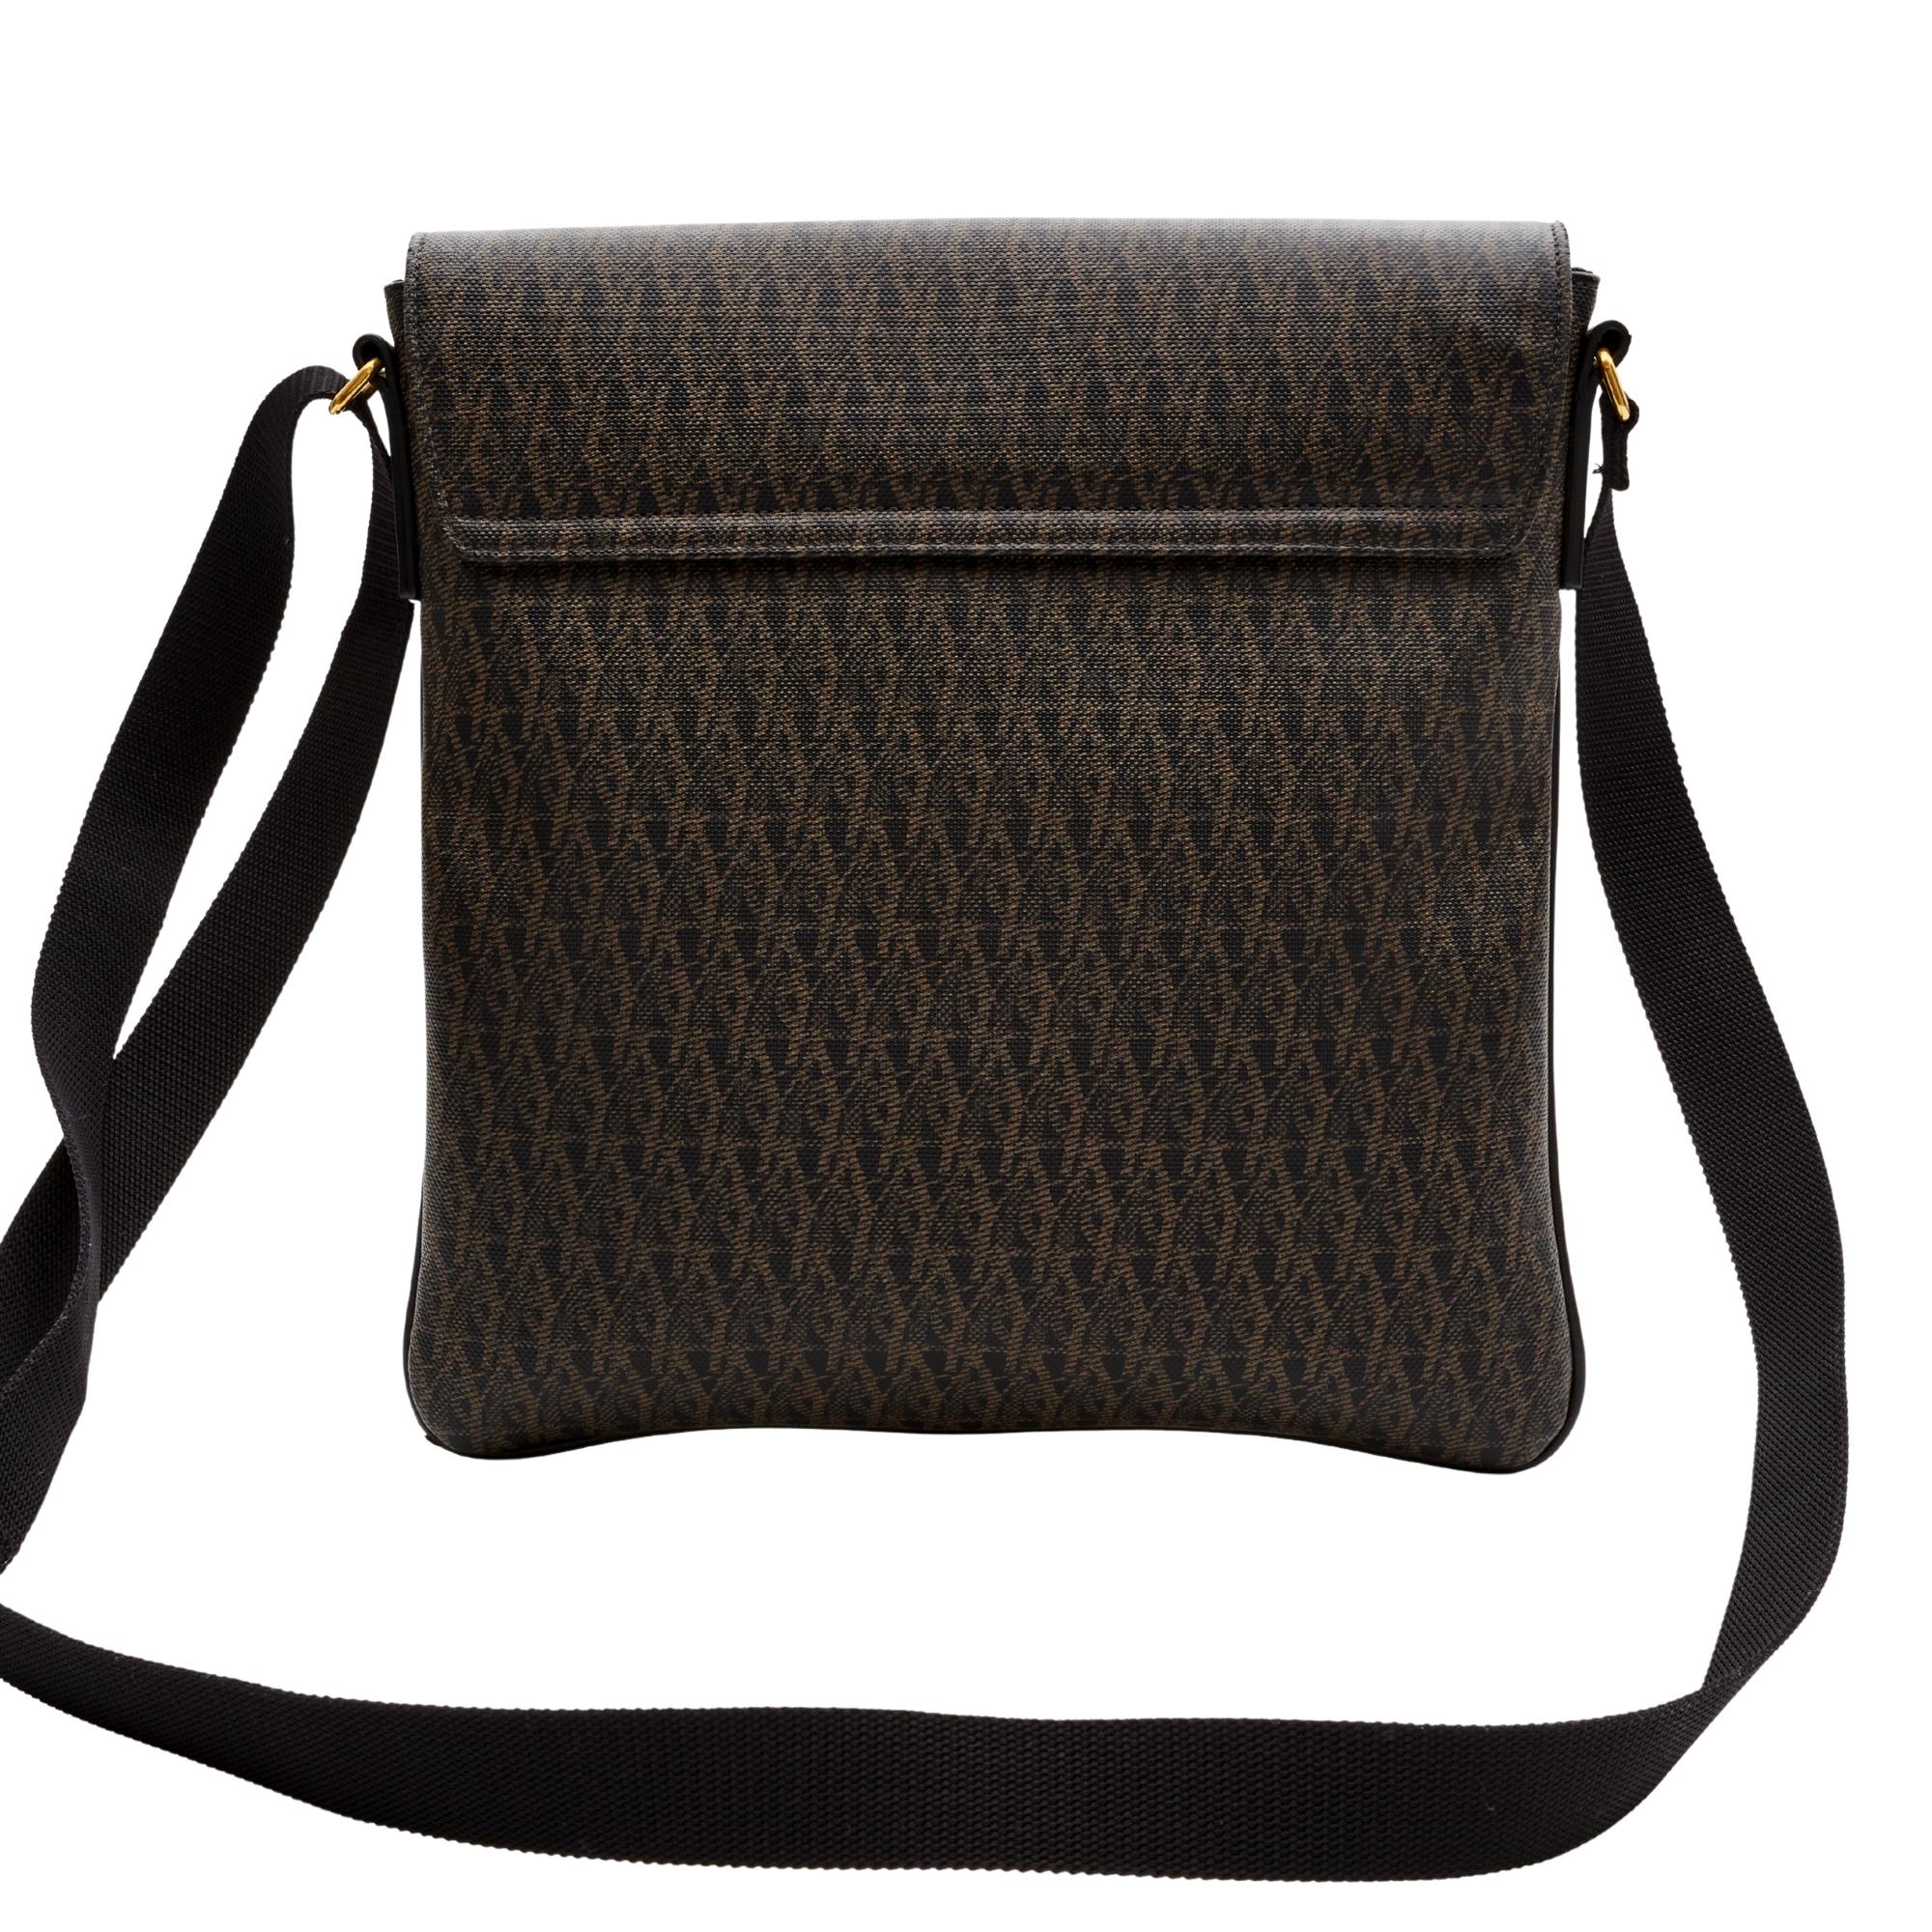 This flat messenger Crossbody bag is made with brown coated canvas with leather detail and a woven fabric shoulder strap. The bag features a front flap with magnetic closure and black woven fabric interior lining with a slip pocket.

COLOR: